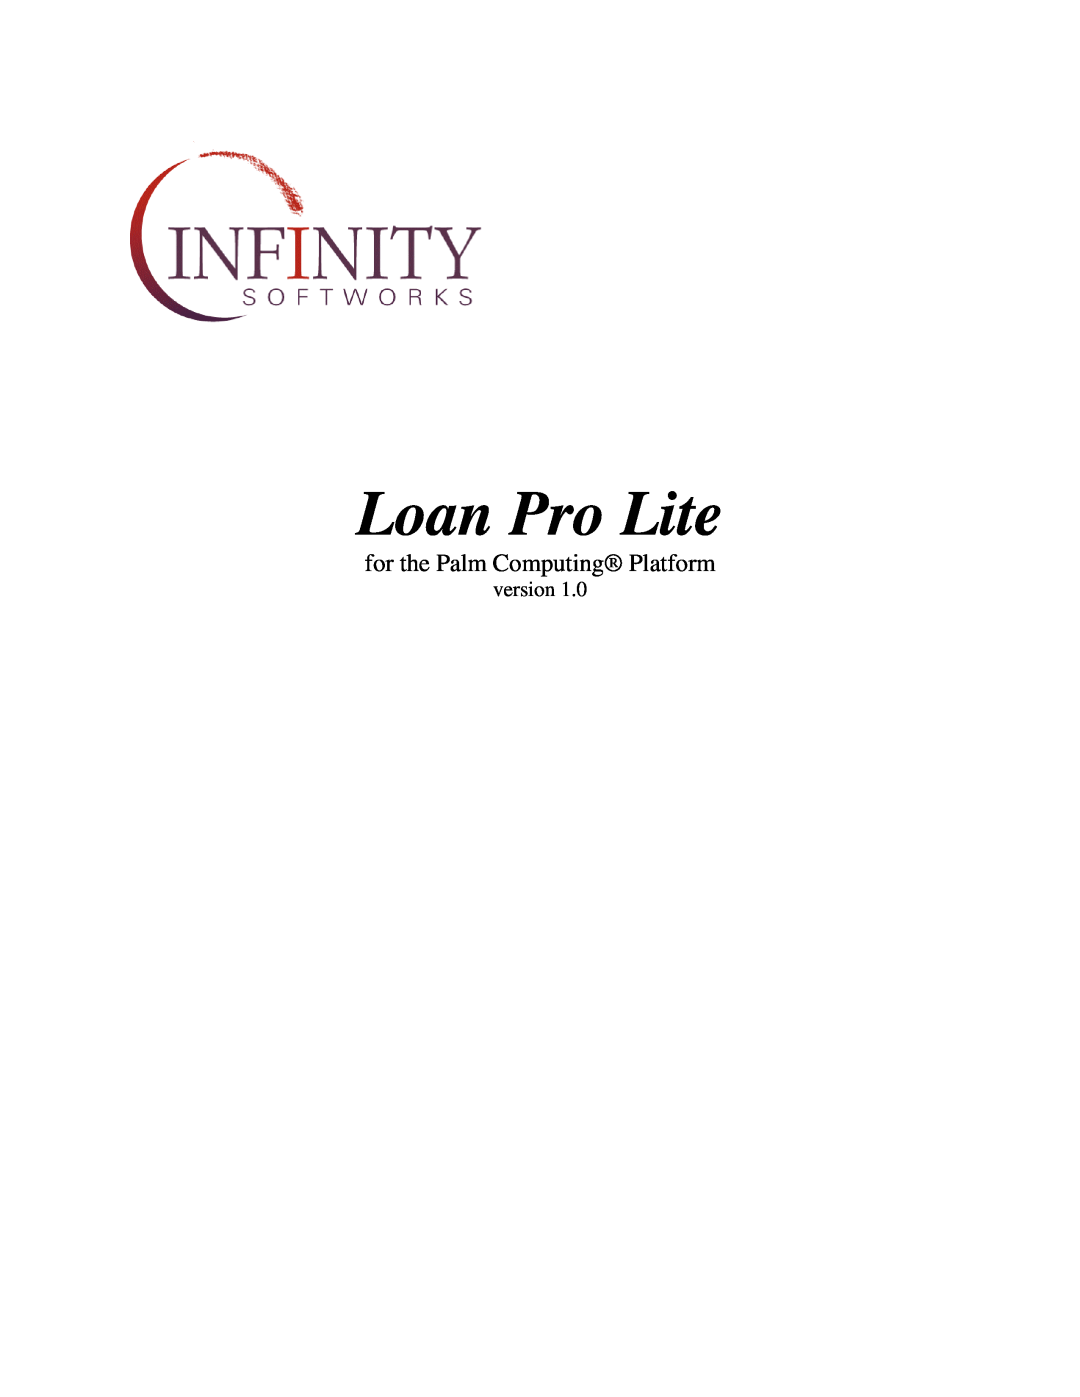 Infinity Softworks manual Loan Pro Lite, for the Palm Computing Platform 